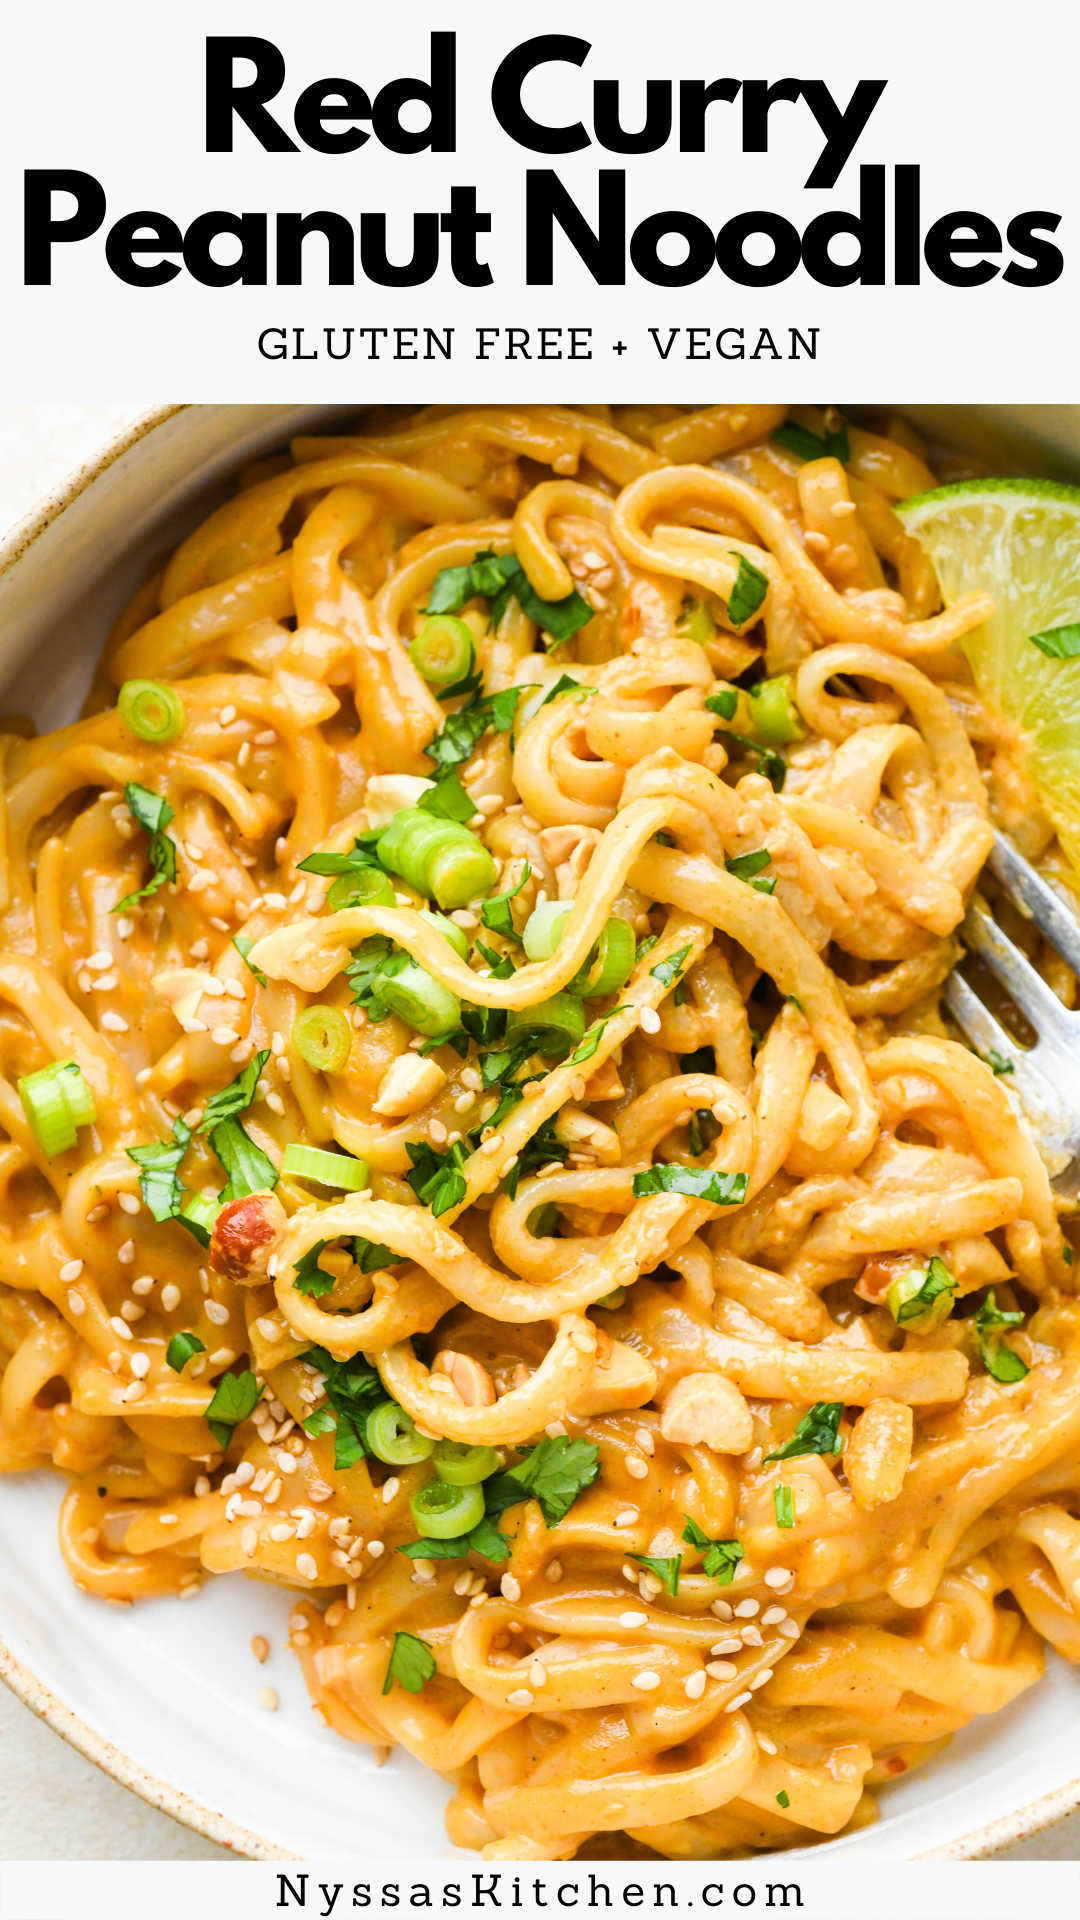 These red curry peanut noodles are a satisfying Thai inspired dish that is so versatile and delicious! Made with gluten free rice noodles, red curry paste, coconut milk, and peanut butter, and ready in less than 30 minutes. Vegan, gluten free, and dairy free.